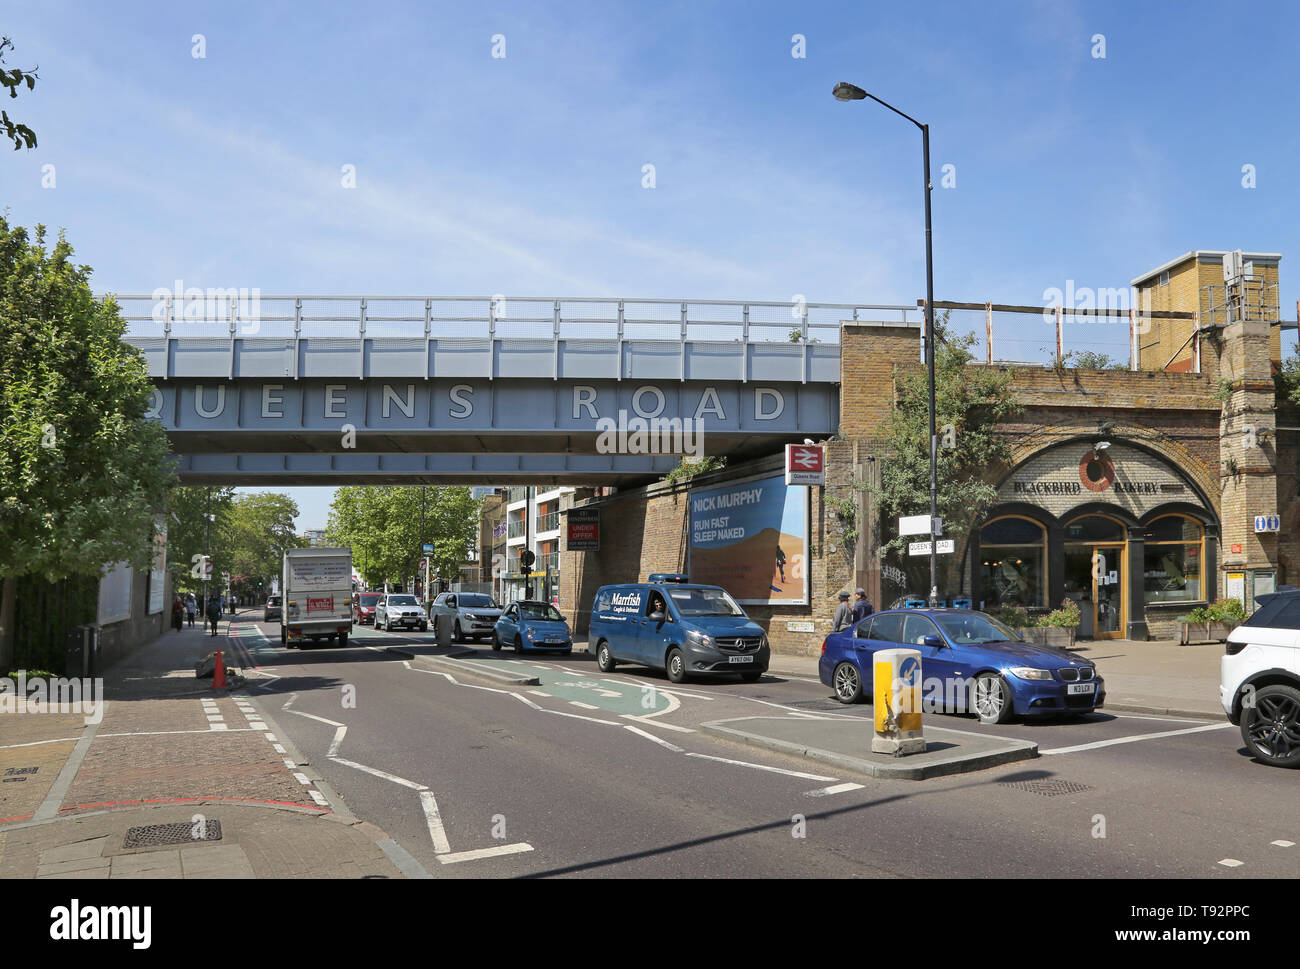 Cafes and shops near Queens Road station in Peckham, southeast London. The latest part of this once poor area to become trendy and fashionable. Stock Photo